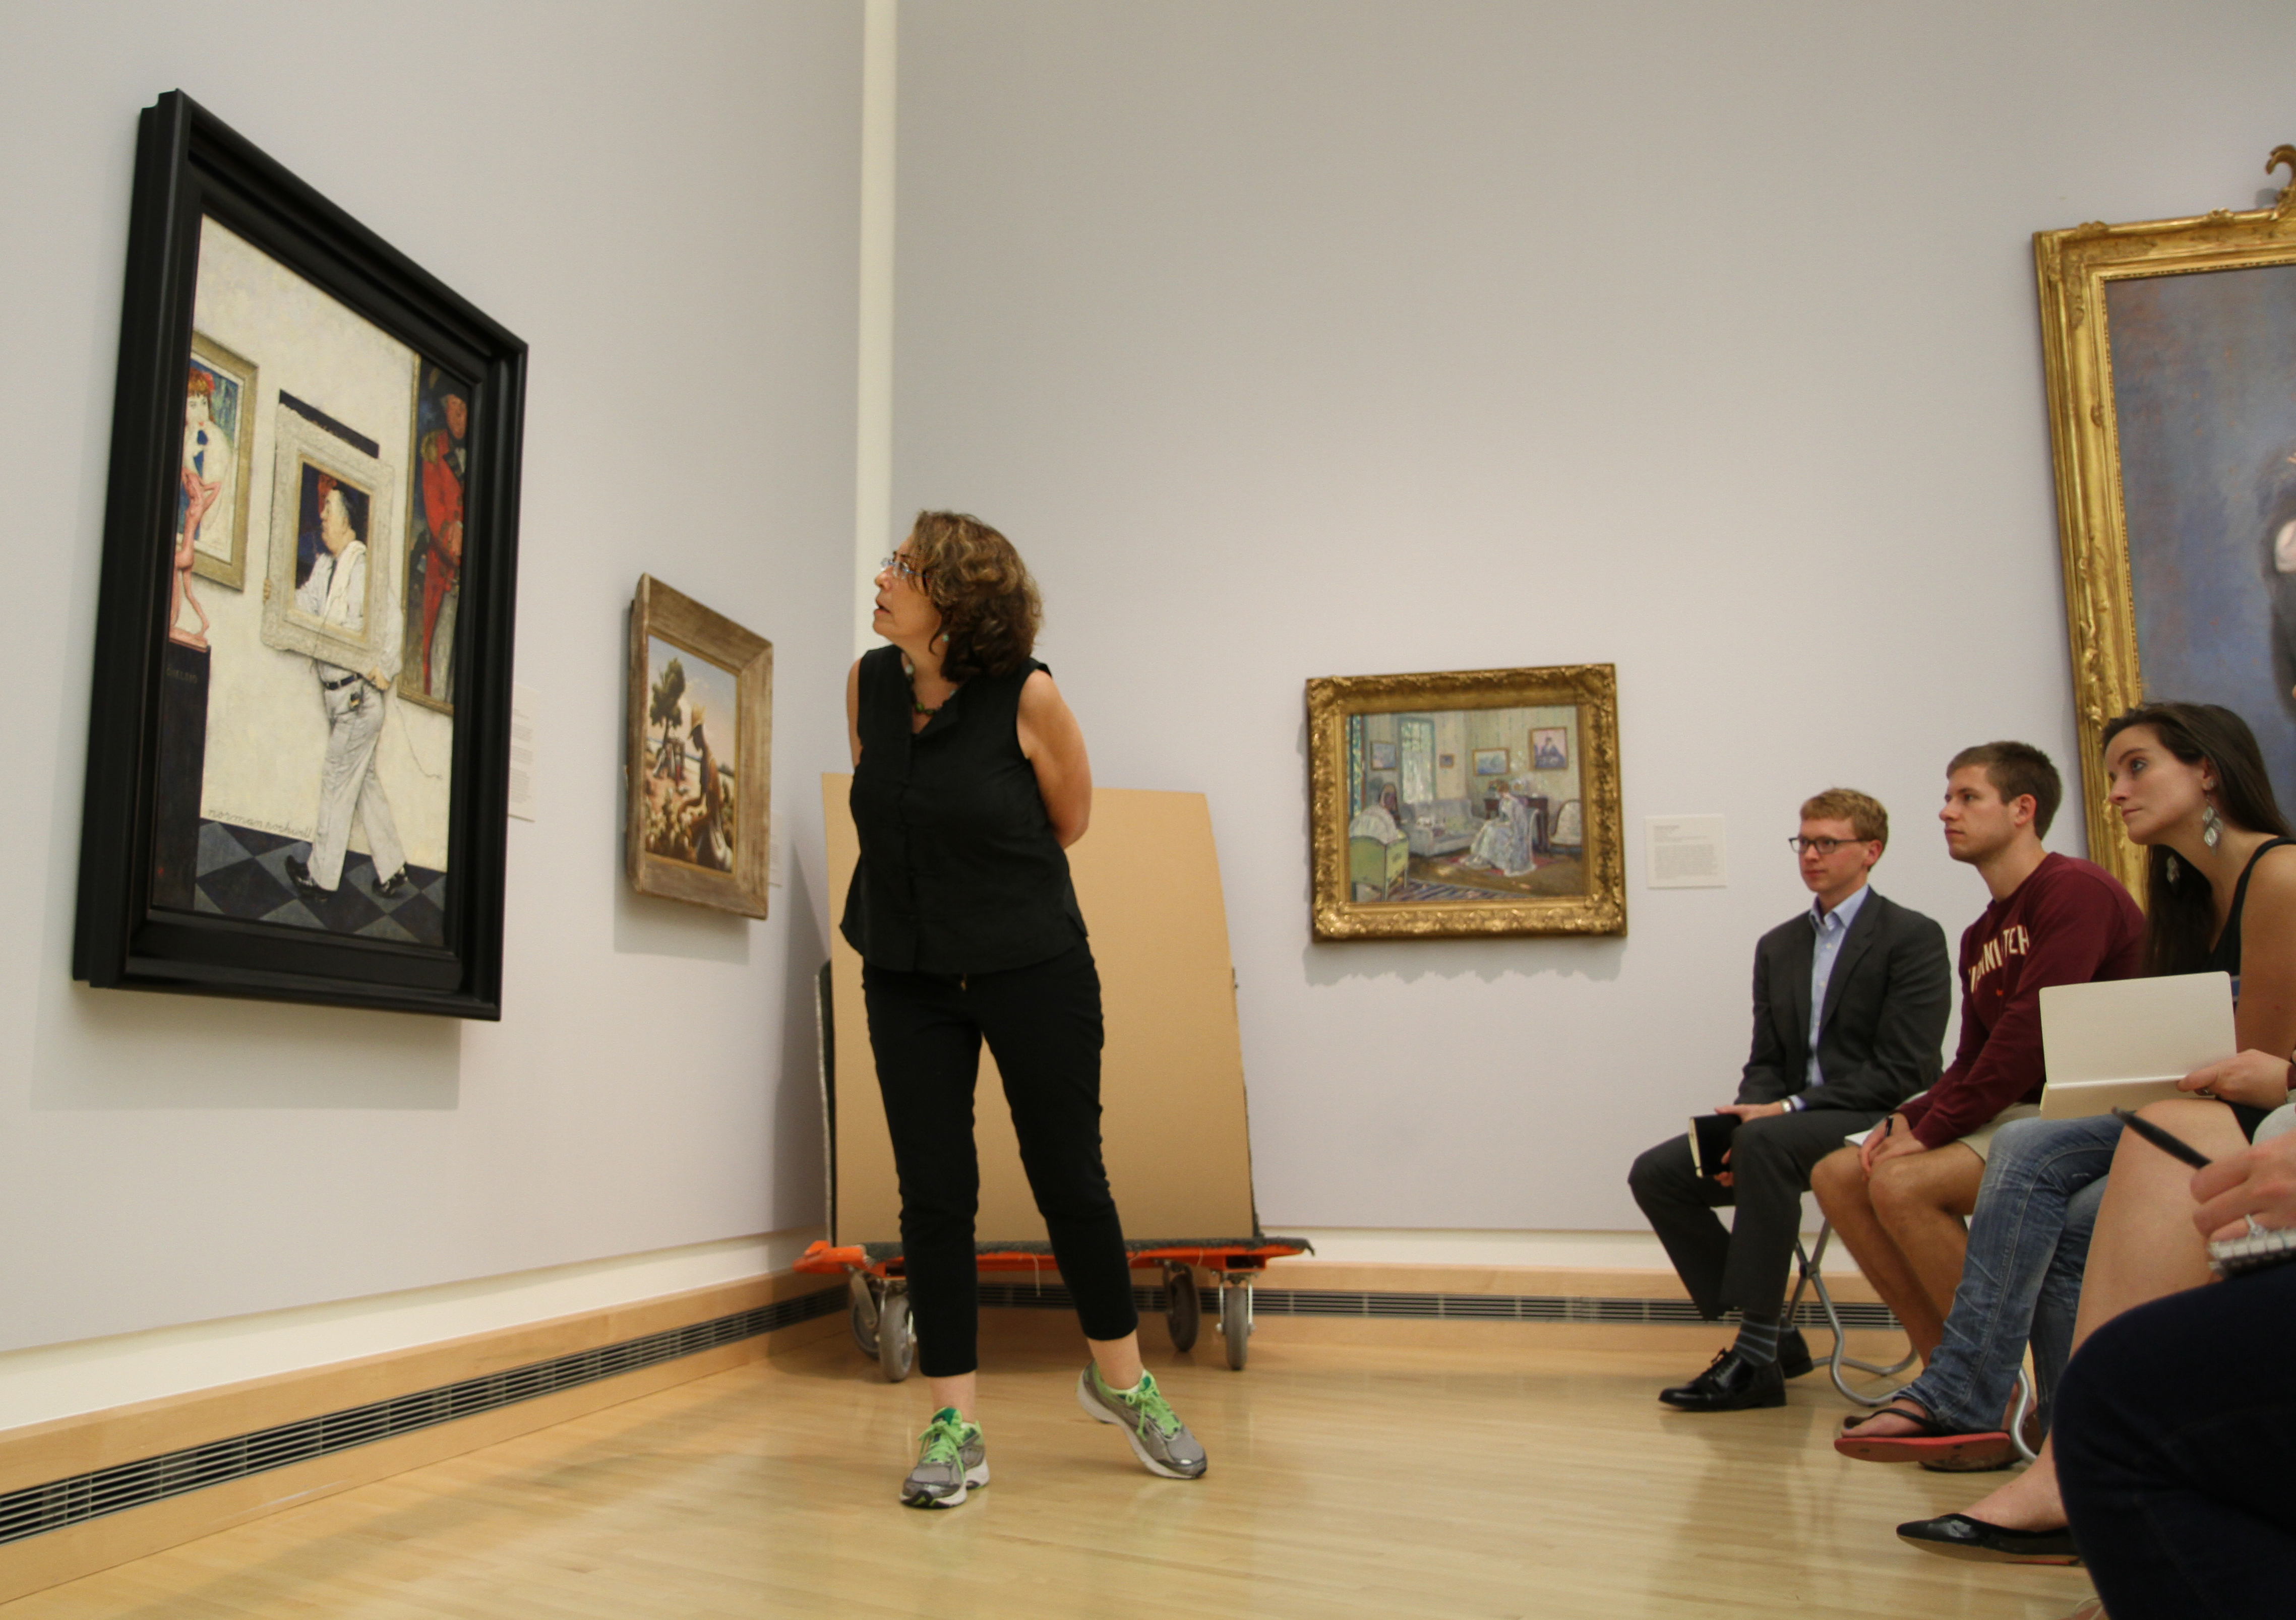 A woman examines a painting on the wall of a museum as seated art history students observe.